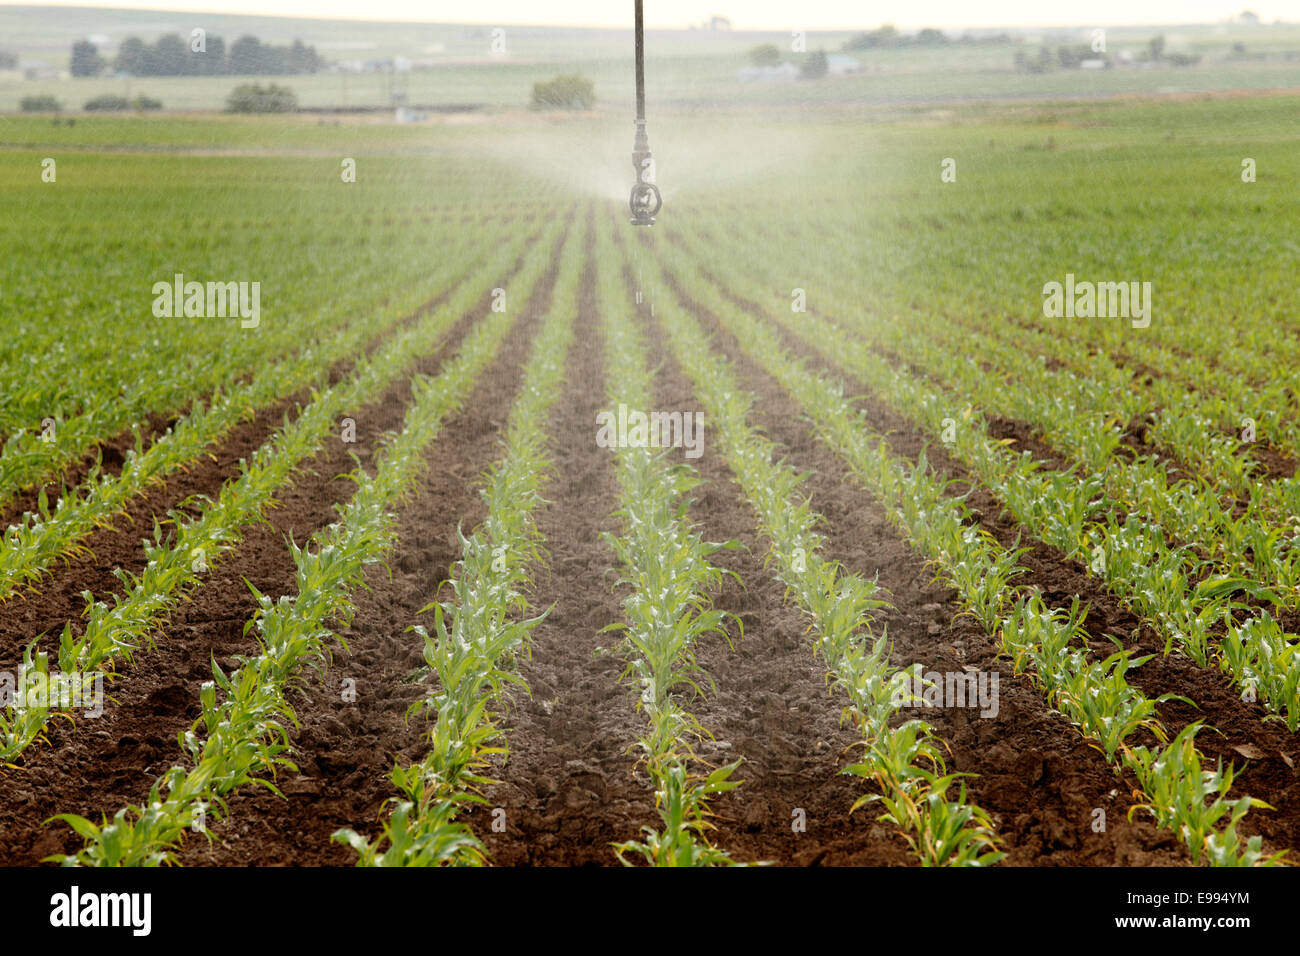 A center pivot sprinkler irrigating rows of corn in a farm field.leaves Stock Photo